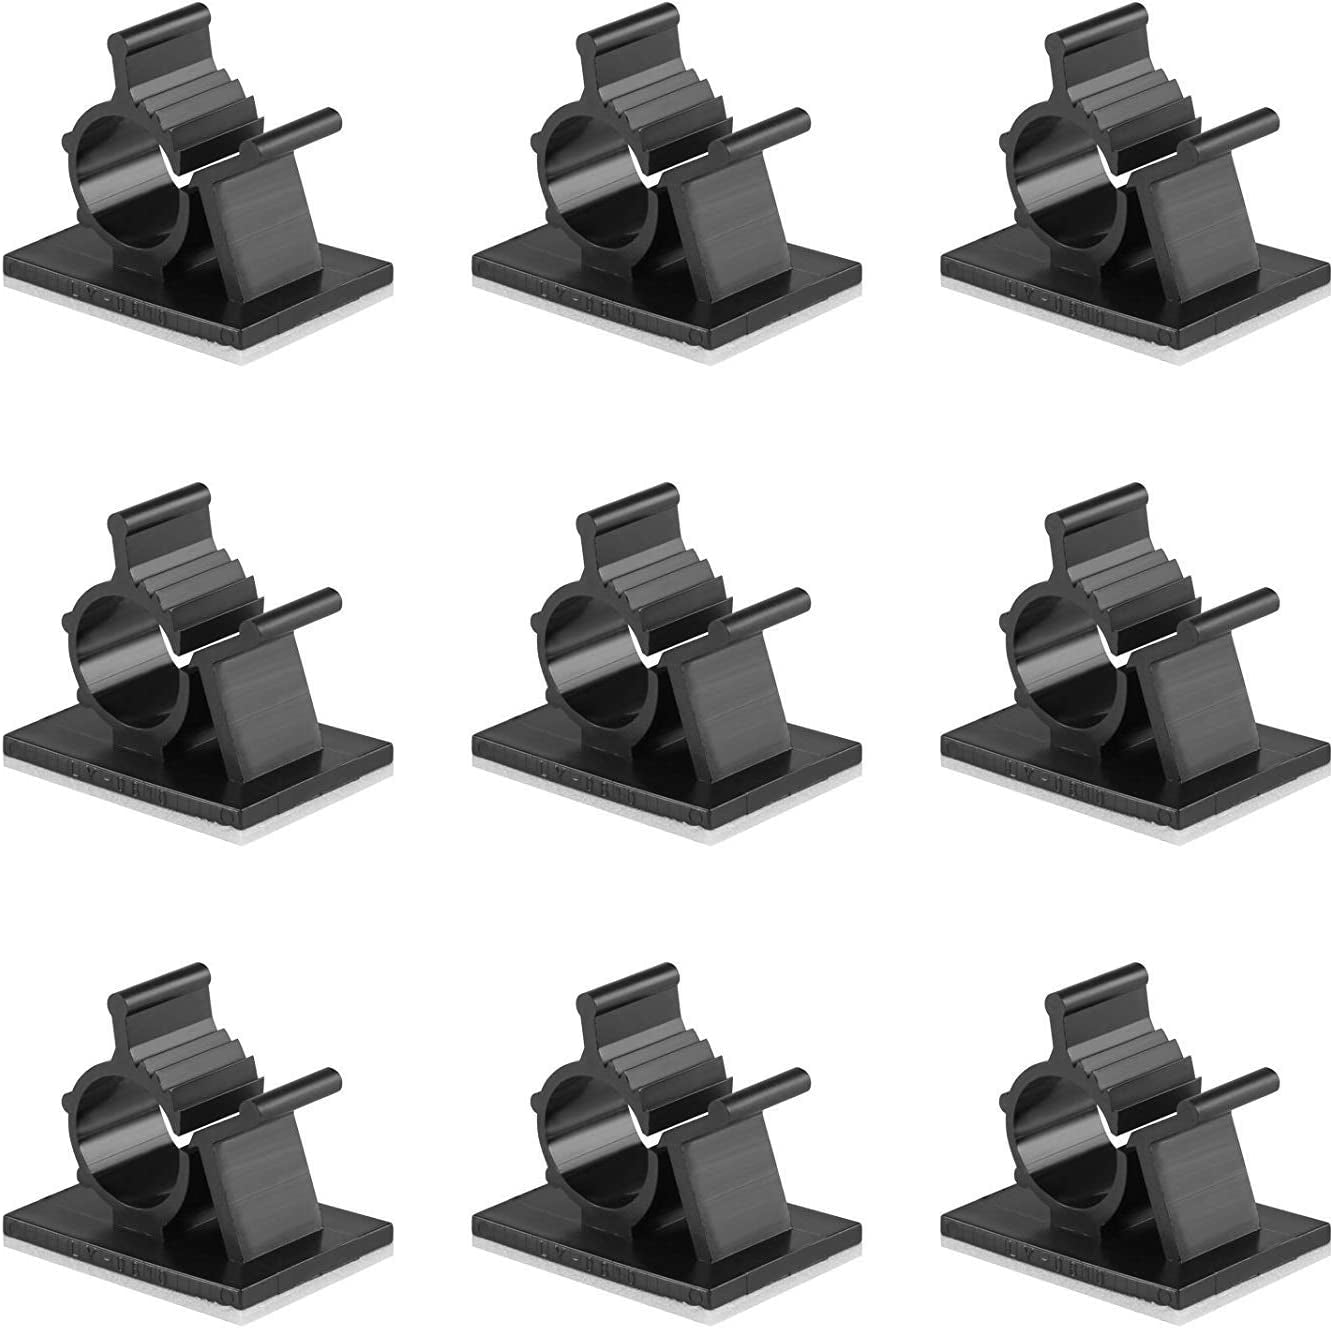 GWHOLE, GWHOLE 60Pcs Adhesive Cable Clips Adjustable Wire Clips Cord Organizer Wire Management for Car, Office and Home